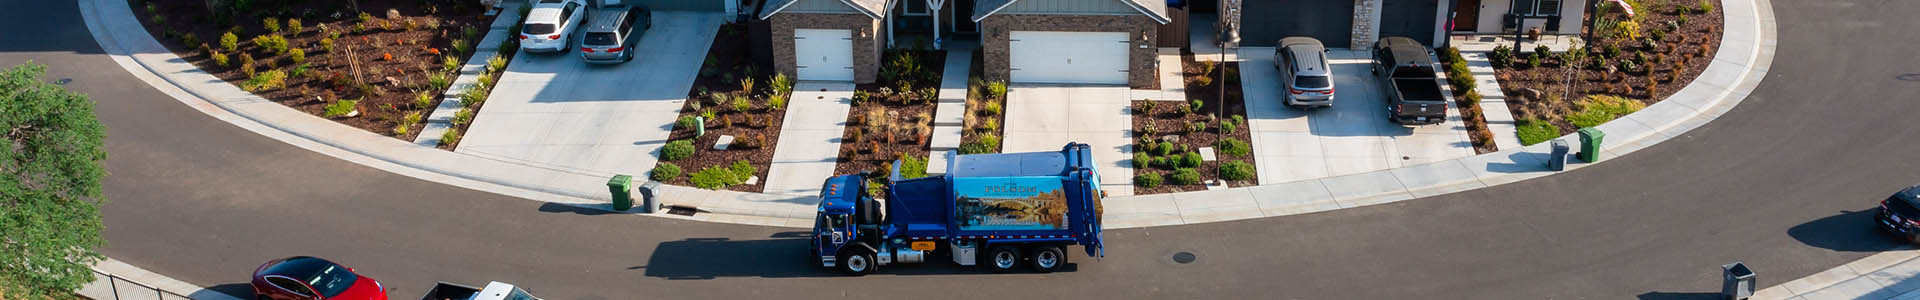 Solid Waste Banner of blue waste truck going to pick up cans in a neighborhood